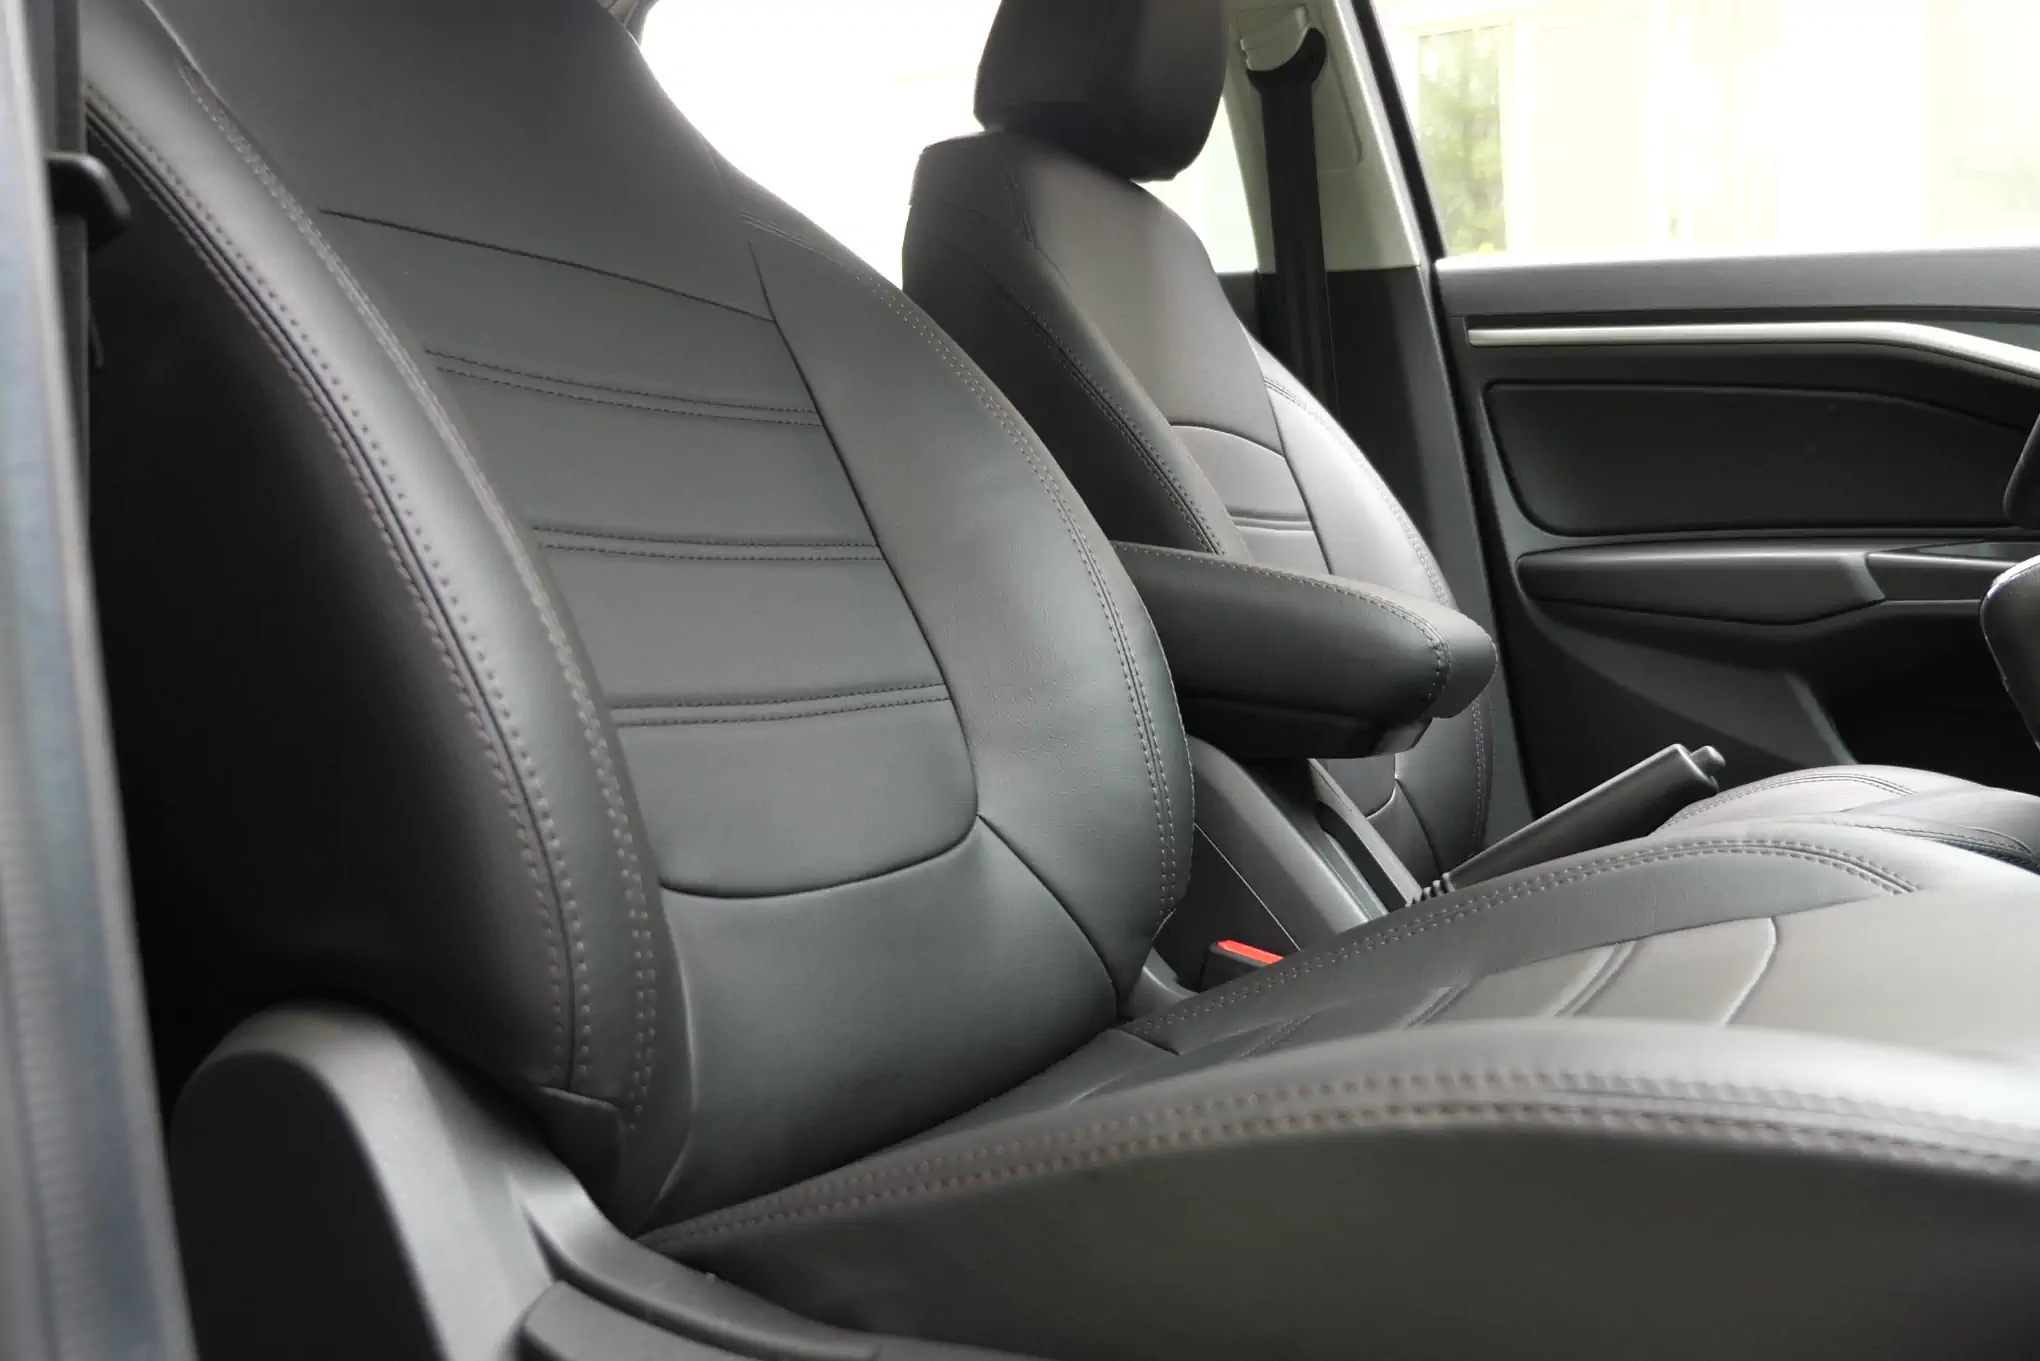 Enhance your Toyota Corolla 2014 with stylish car seat covers!